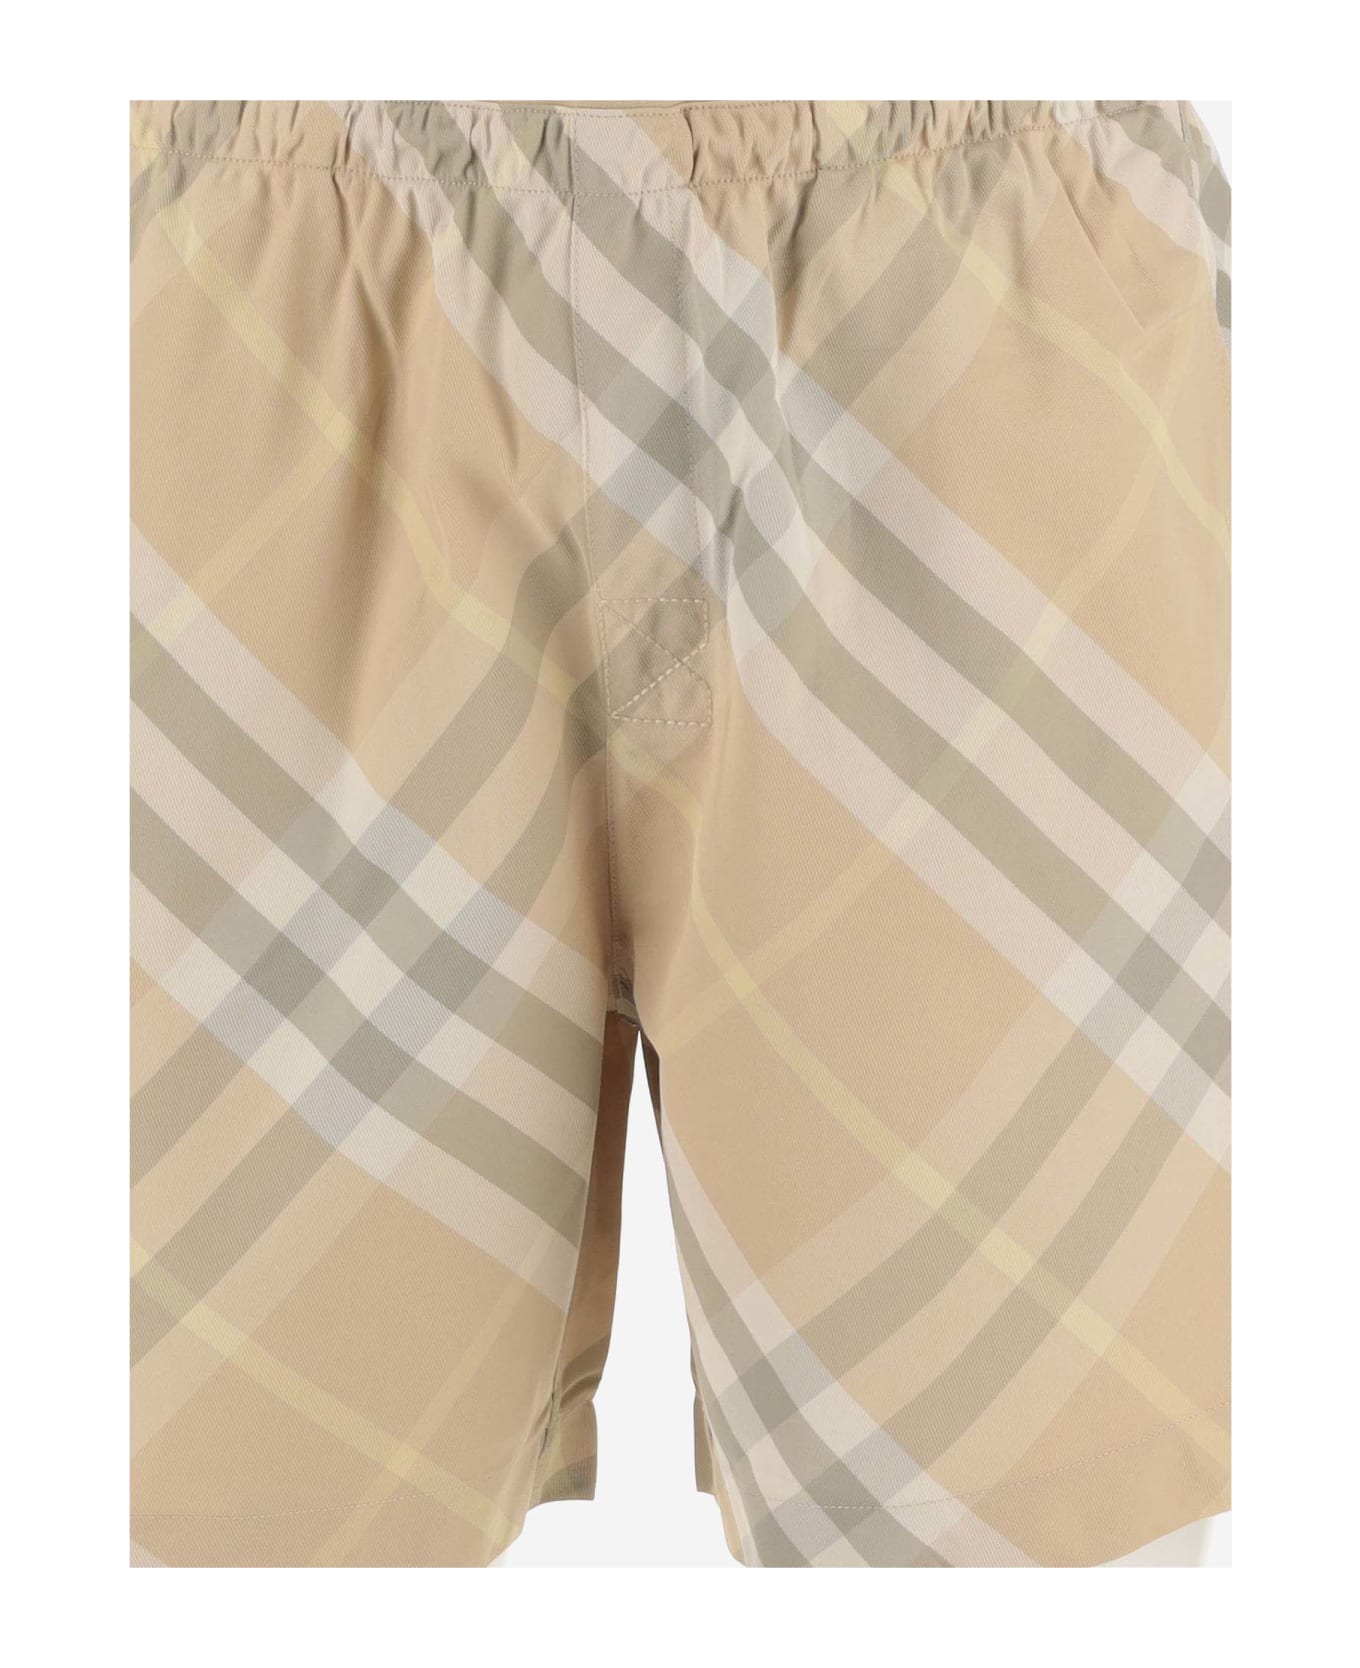 Burberry Nylon Swimsuit With Check Pattern - Red スイムトランクス